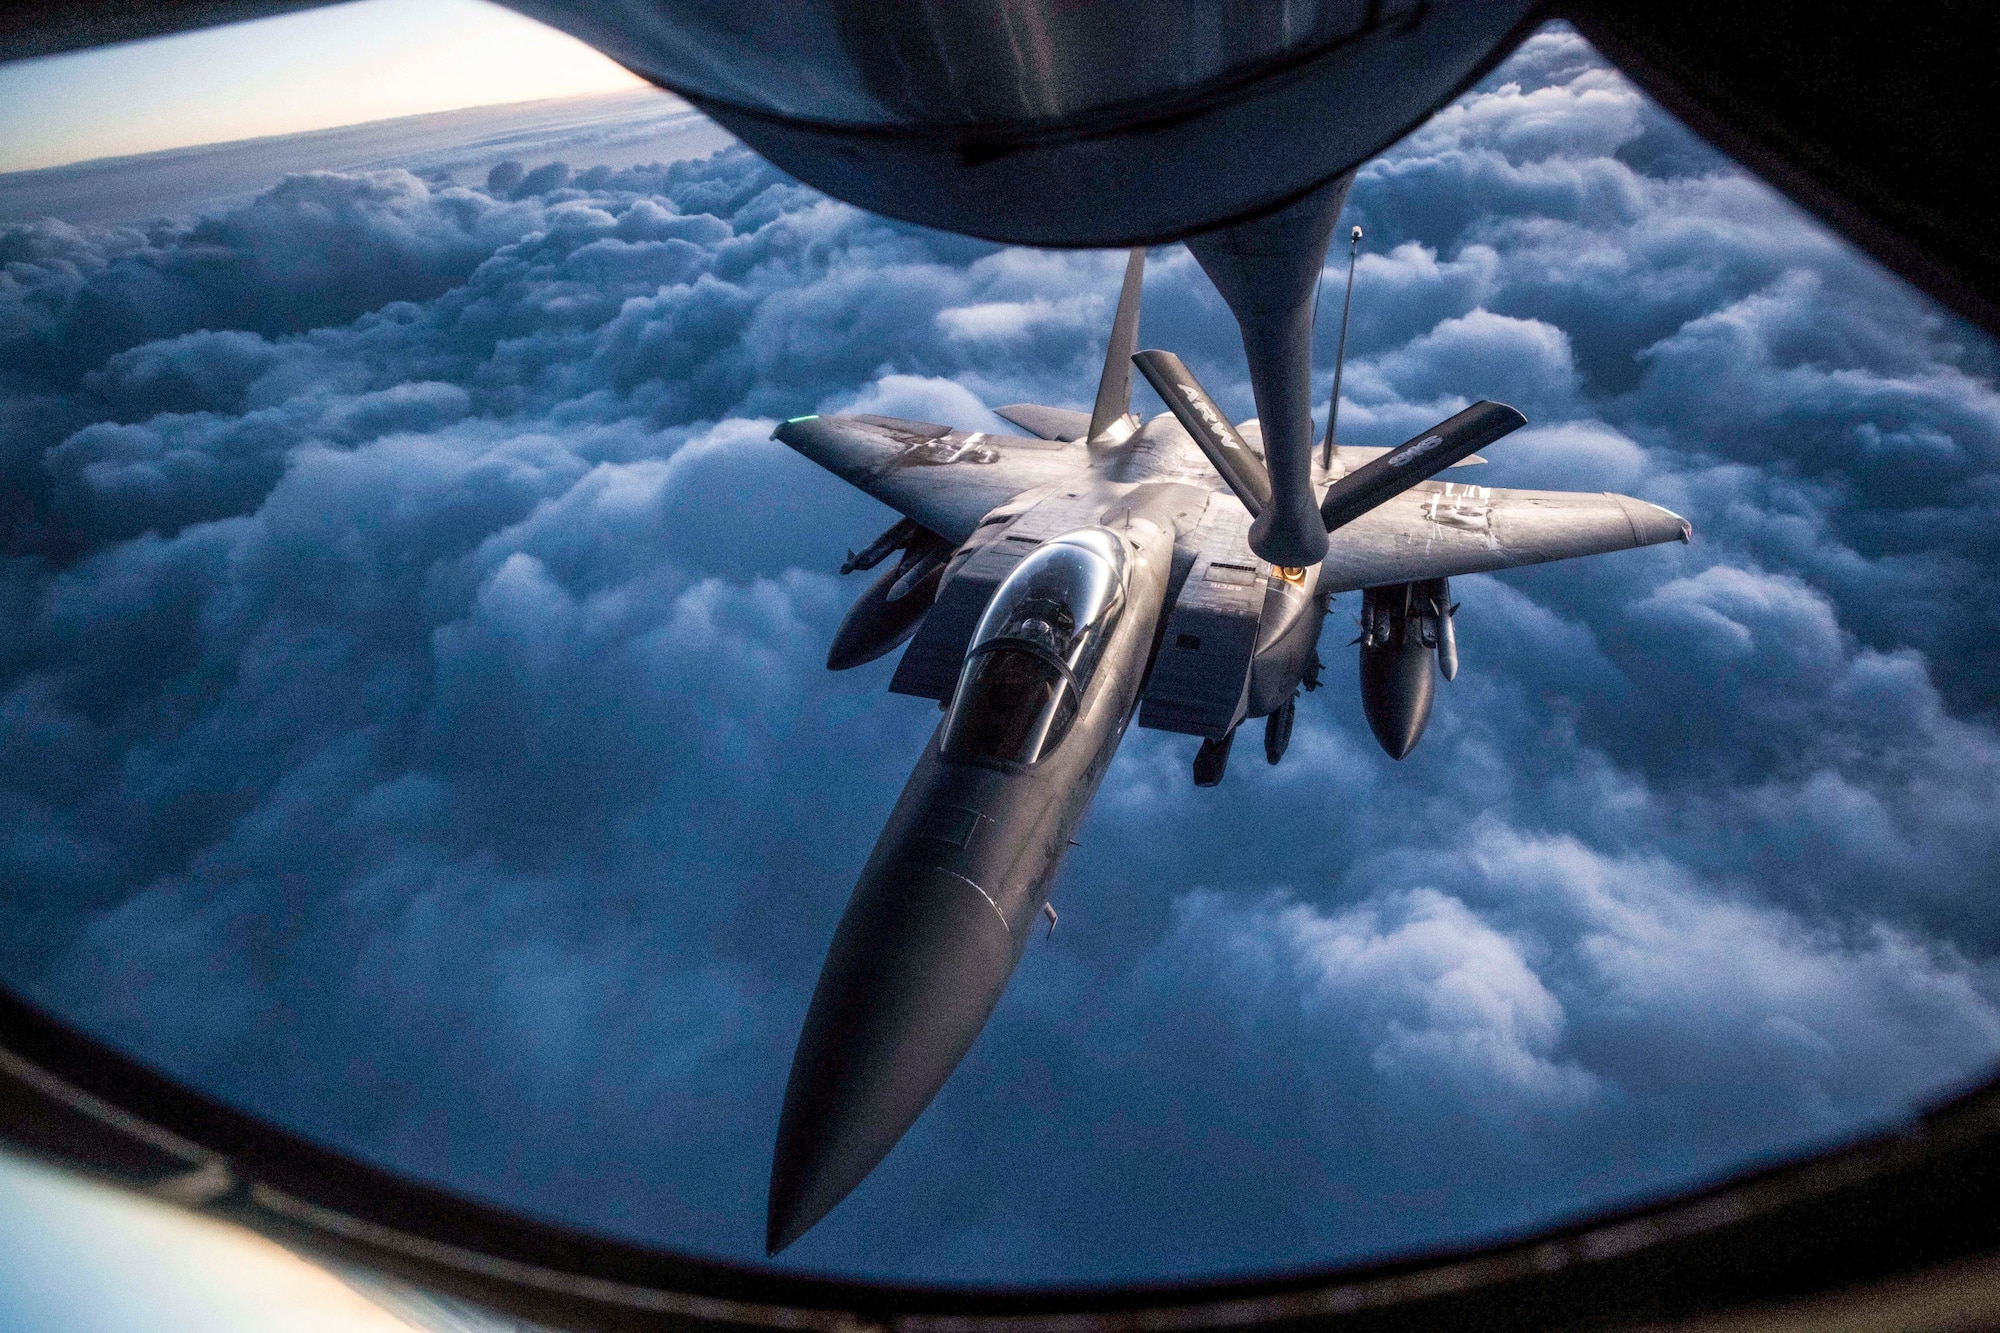 An F-15 Strike Eagle receives an aerial refueling from a KC-135 Stratotanker assigned to the 28th Expeditionary Air Refueling Squadron during a mission in support of Operation Inherent Resolve over Iraq, Sept. 12, 2018. The KC-135 provides aerial refueling to U.S. and coalition forces. The F-15 Eagle is an all-weather, extremely maneuverable, tactical fighter designed to permit the Air Force to gain and maintain air supremacy over the battlefield. (U.S. Air Force photo by Staff Sgt. Keith James)